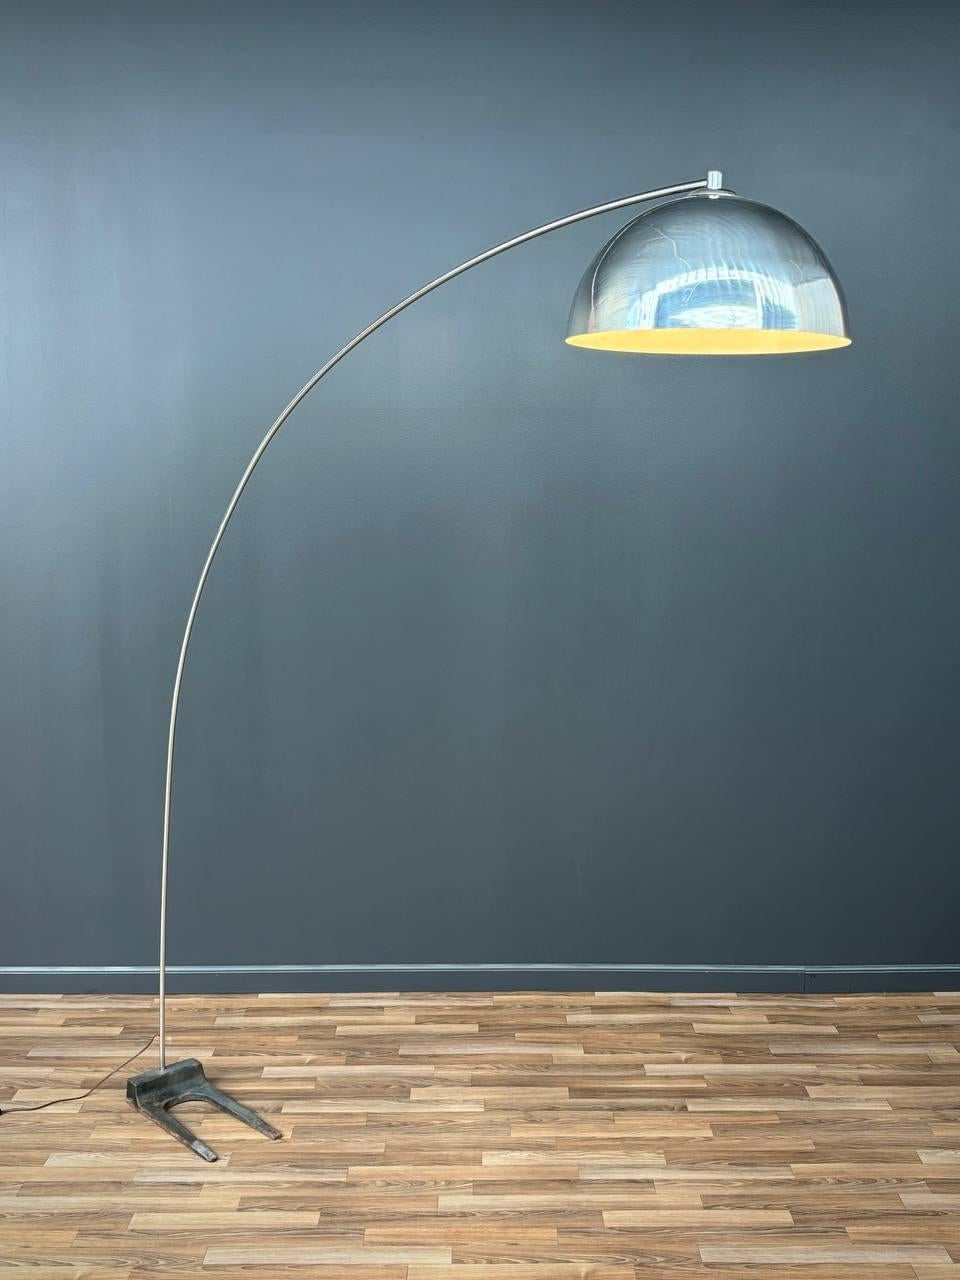 Newly Rewired

Materials: Polished Chrome, Iron Base

Dimensions: 
Lamp:
80”H x 7.75”W x 78”D
Shade:
9